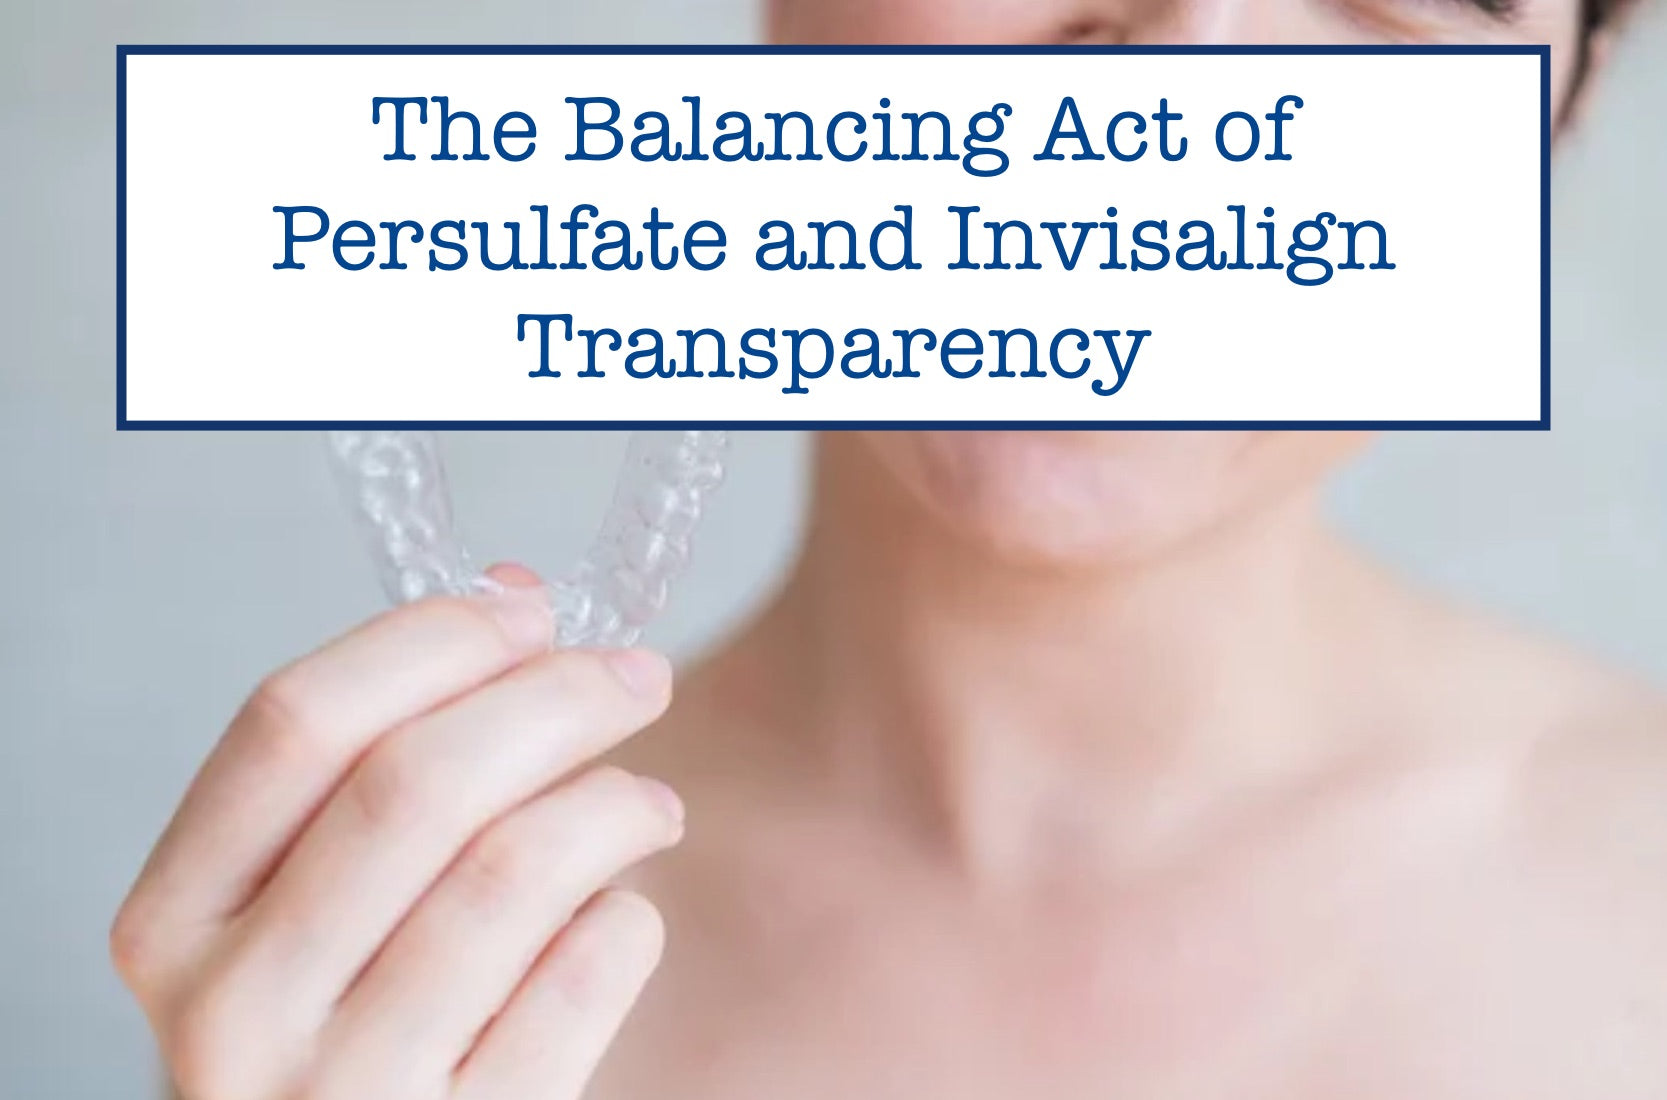 The Balancing Act of Persulfate and Invisalign Transparency